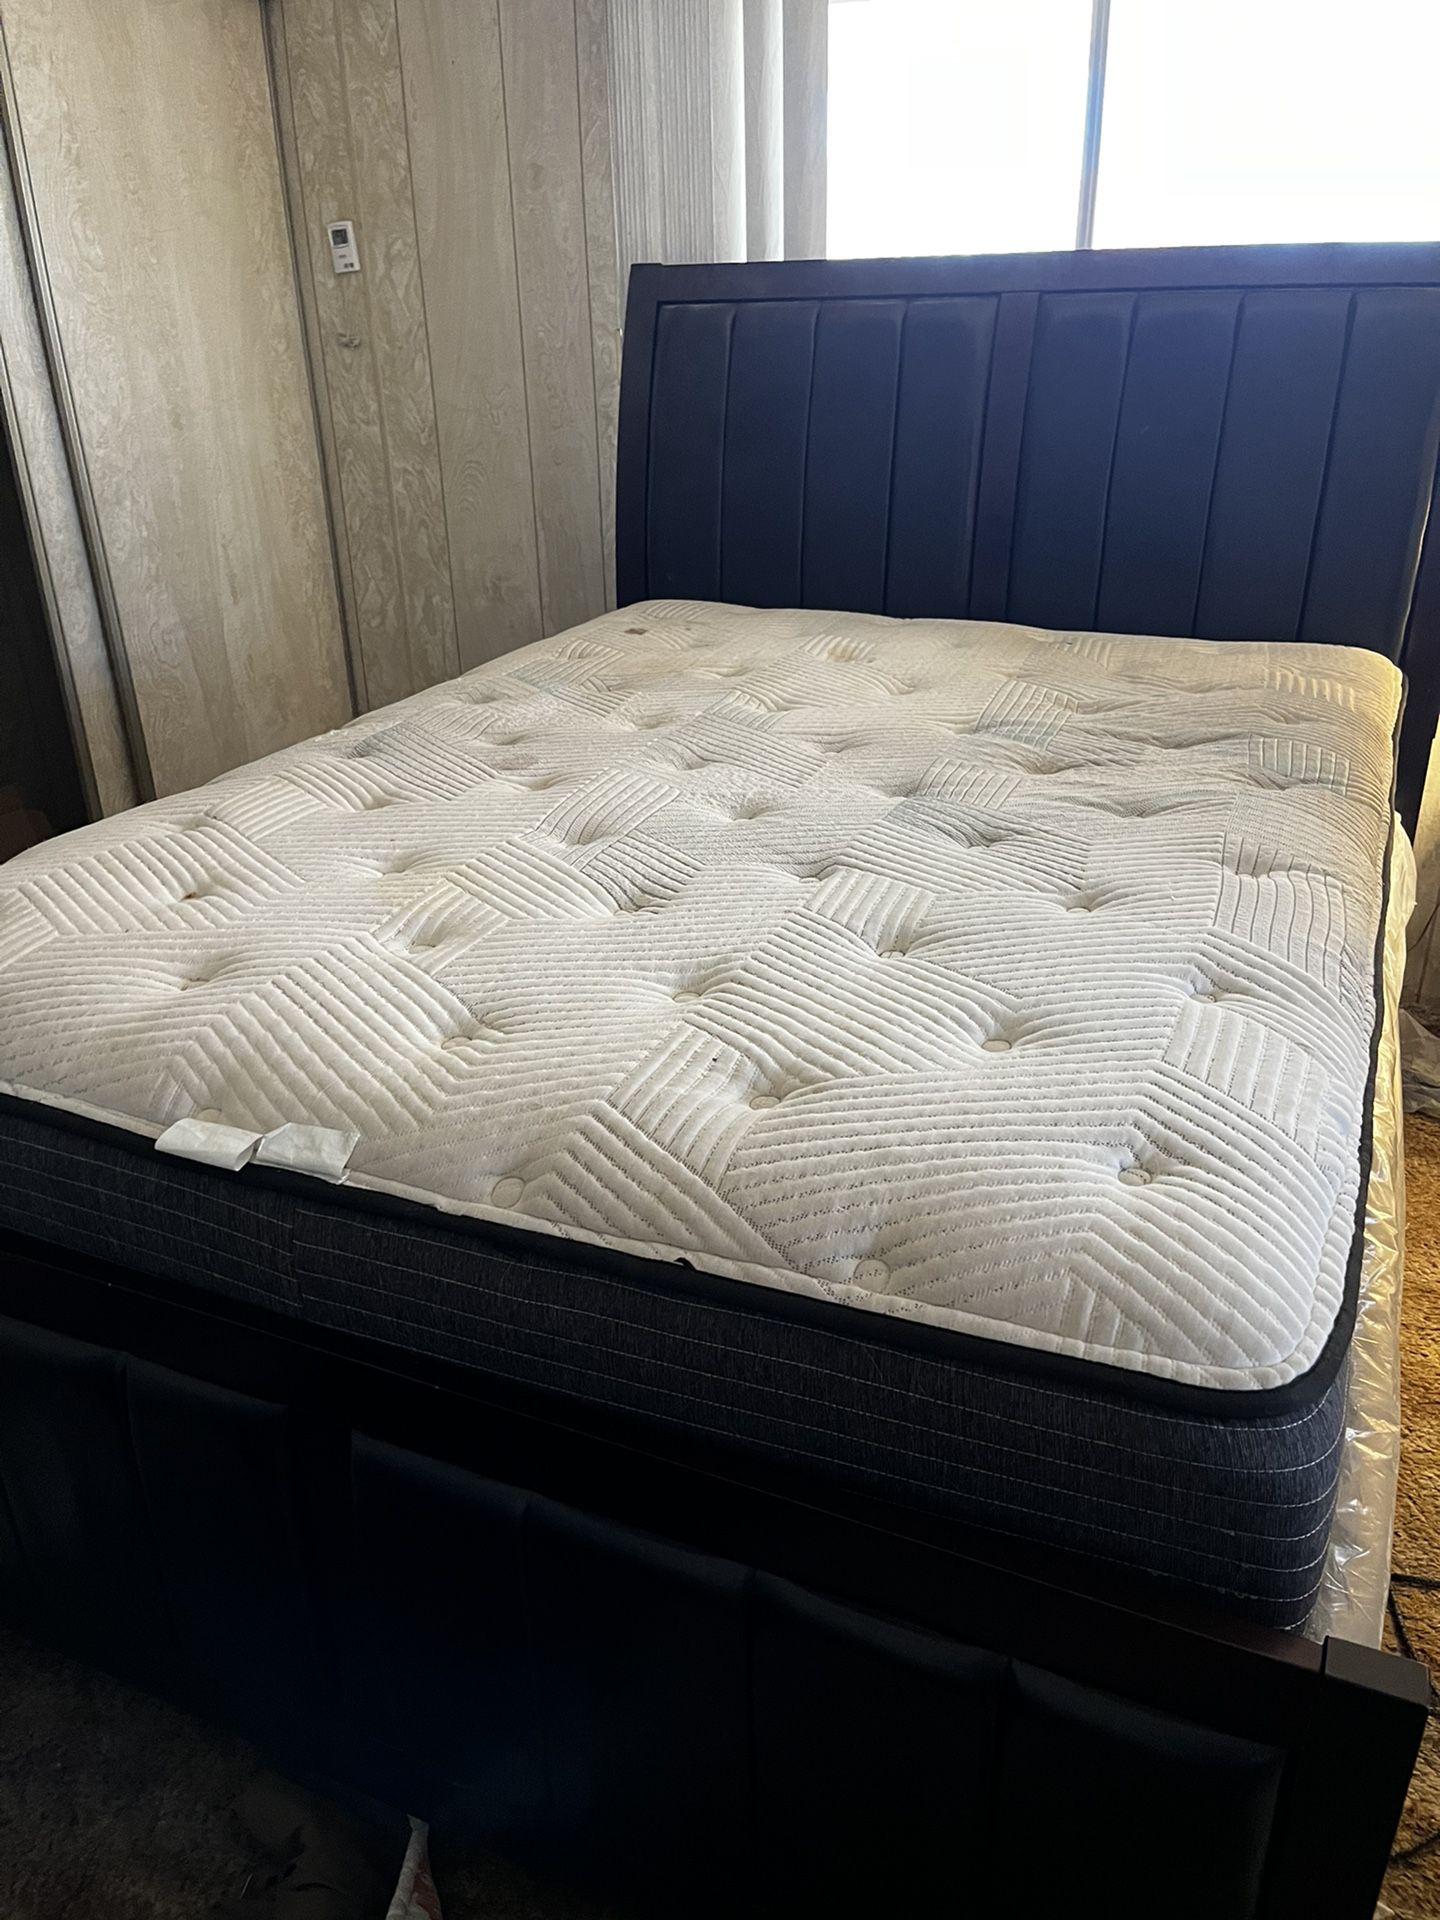 Plush Hybrid Mattress, Box spring , and Queen Bed